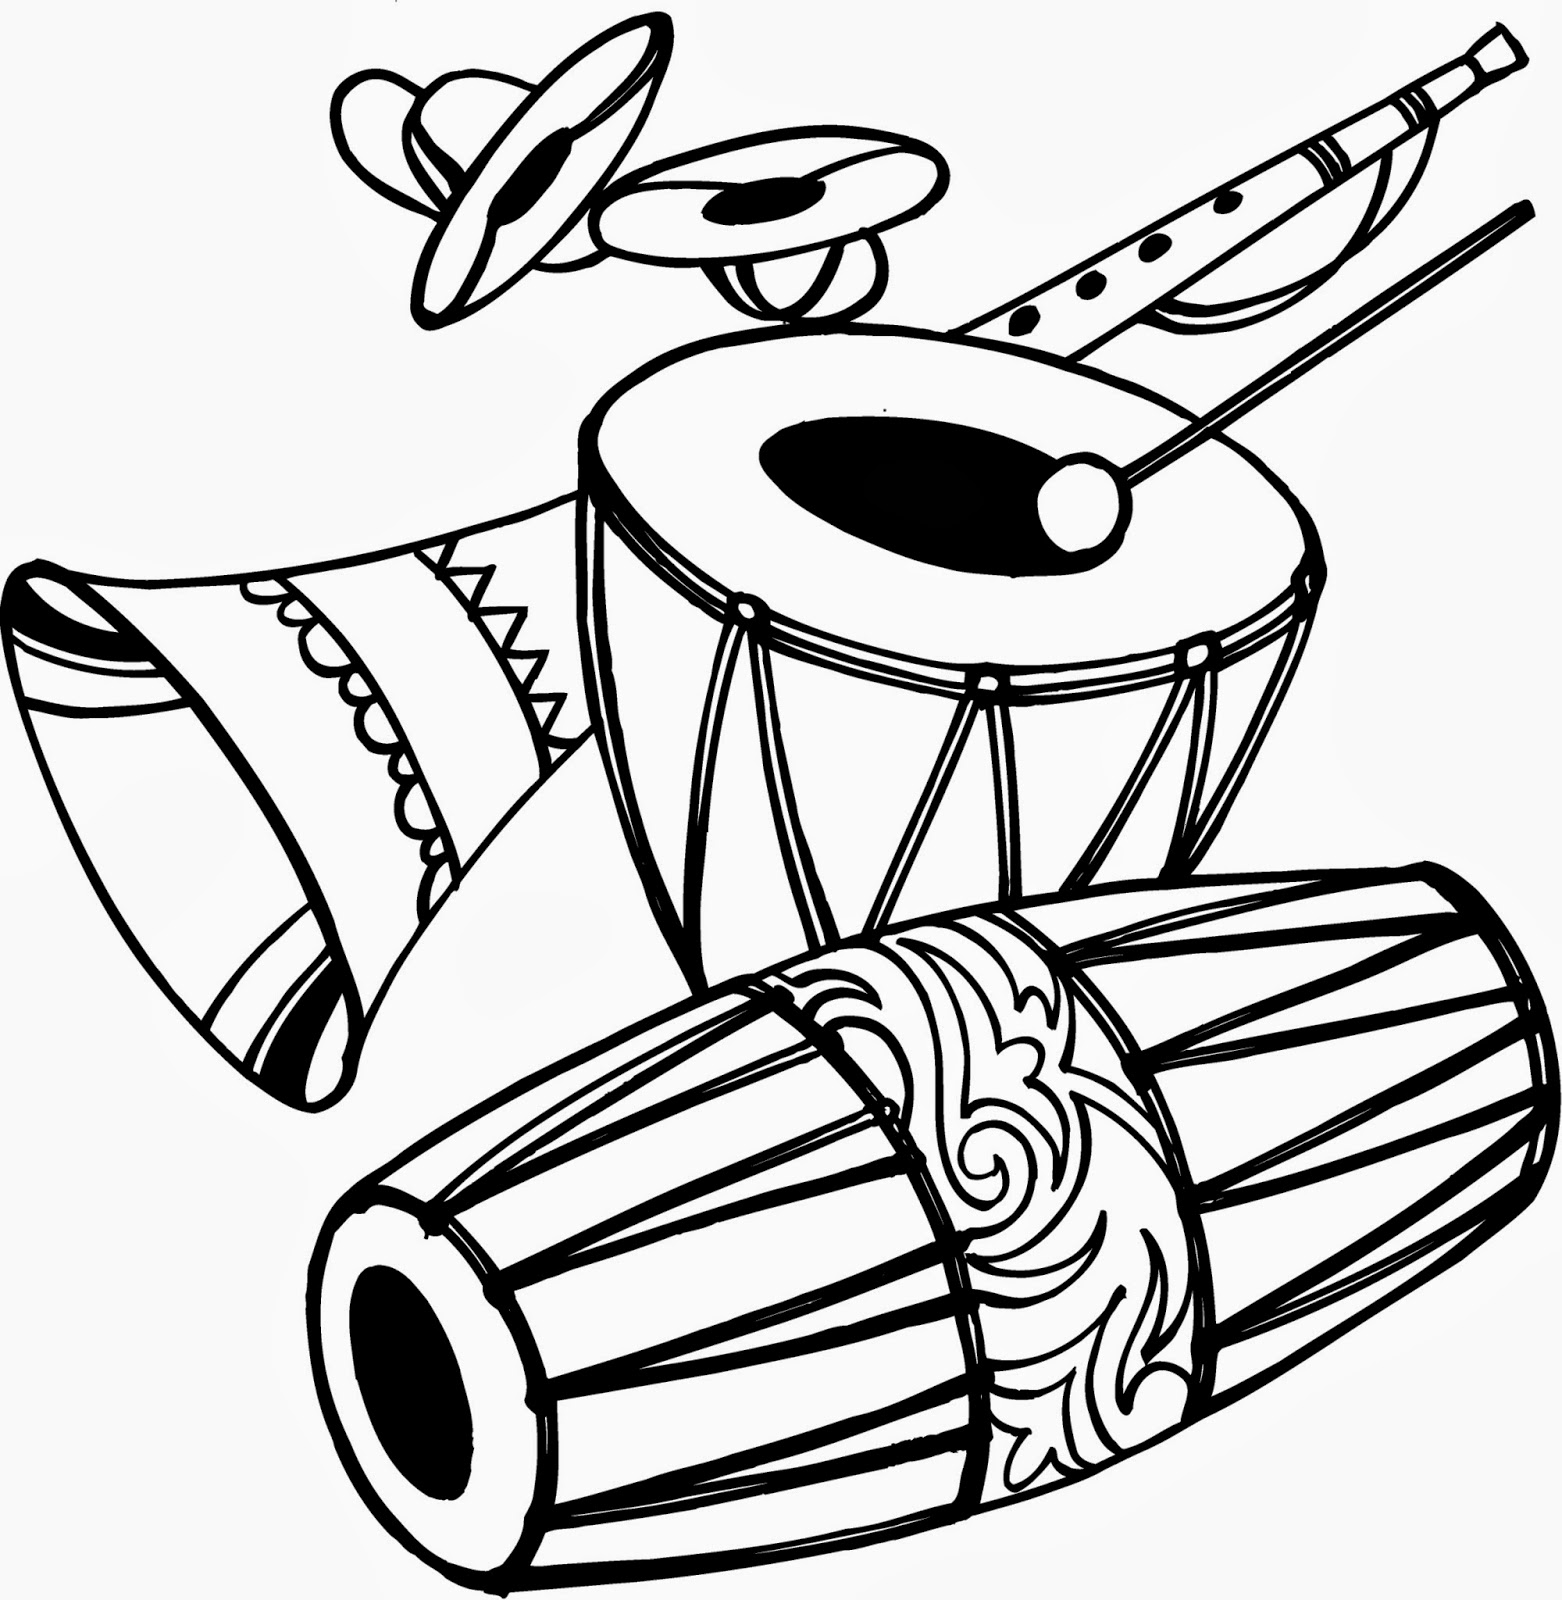 Dhol Clipart Black And White 10 - Dhol Black And White, Transparent background PNG HD thumbnail